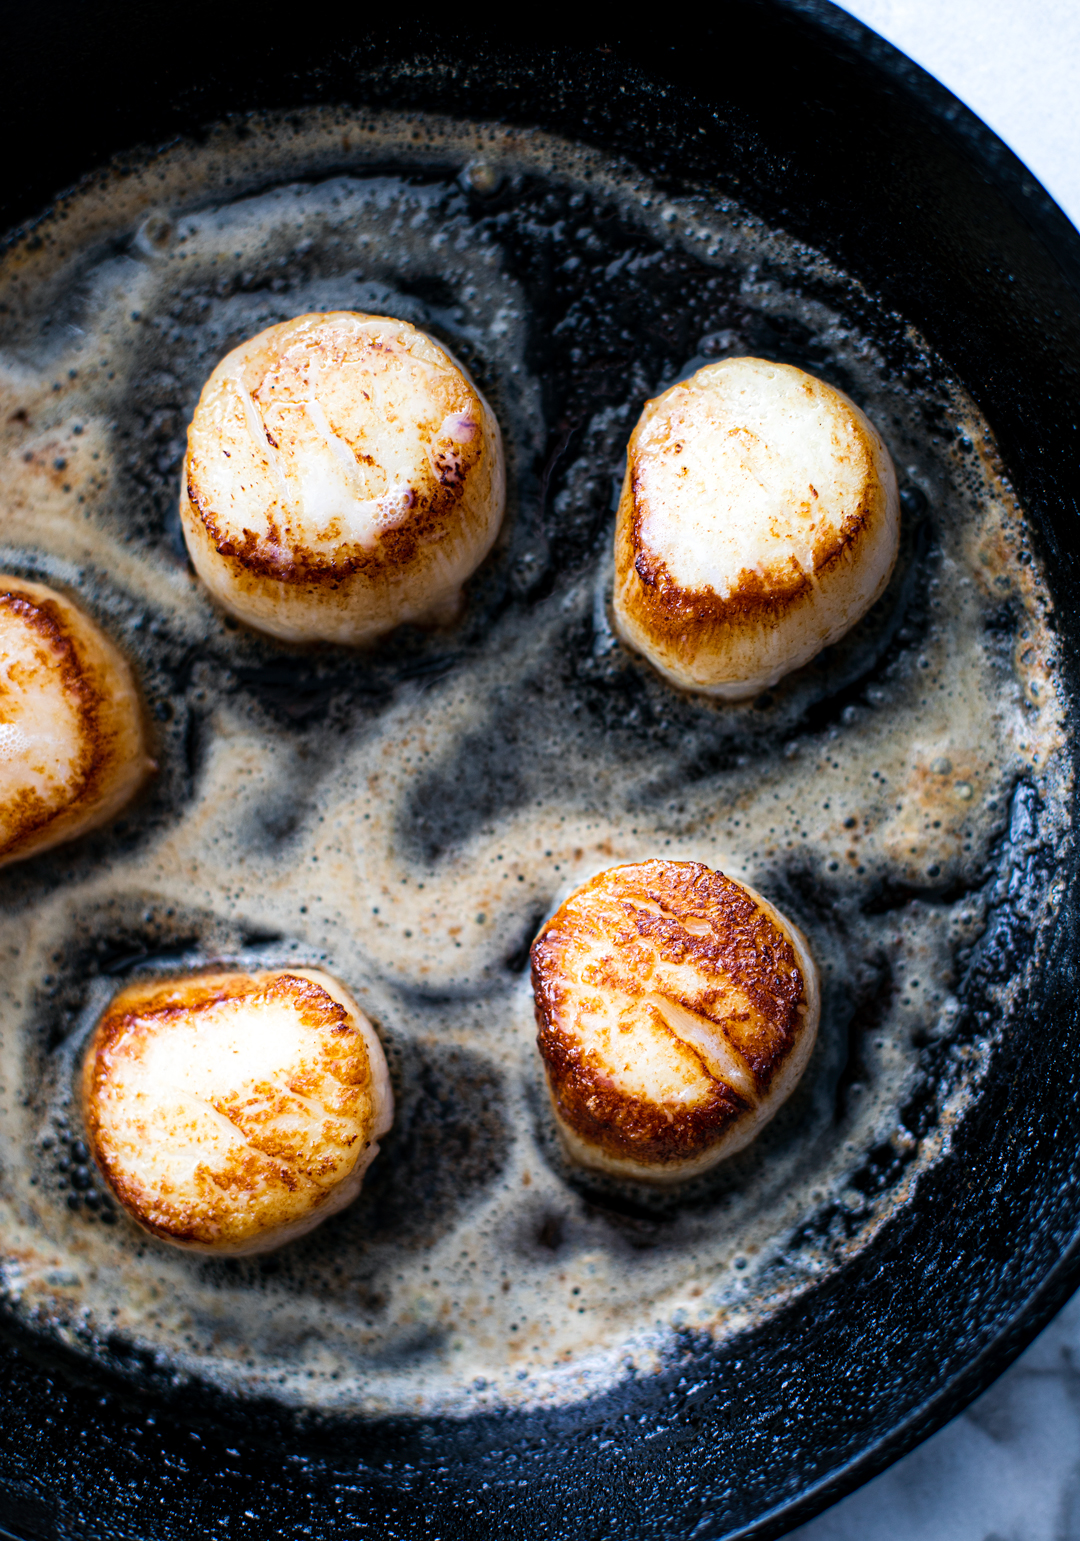 Seared scallop in a pan full of melted butter.